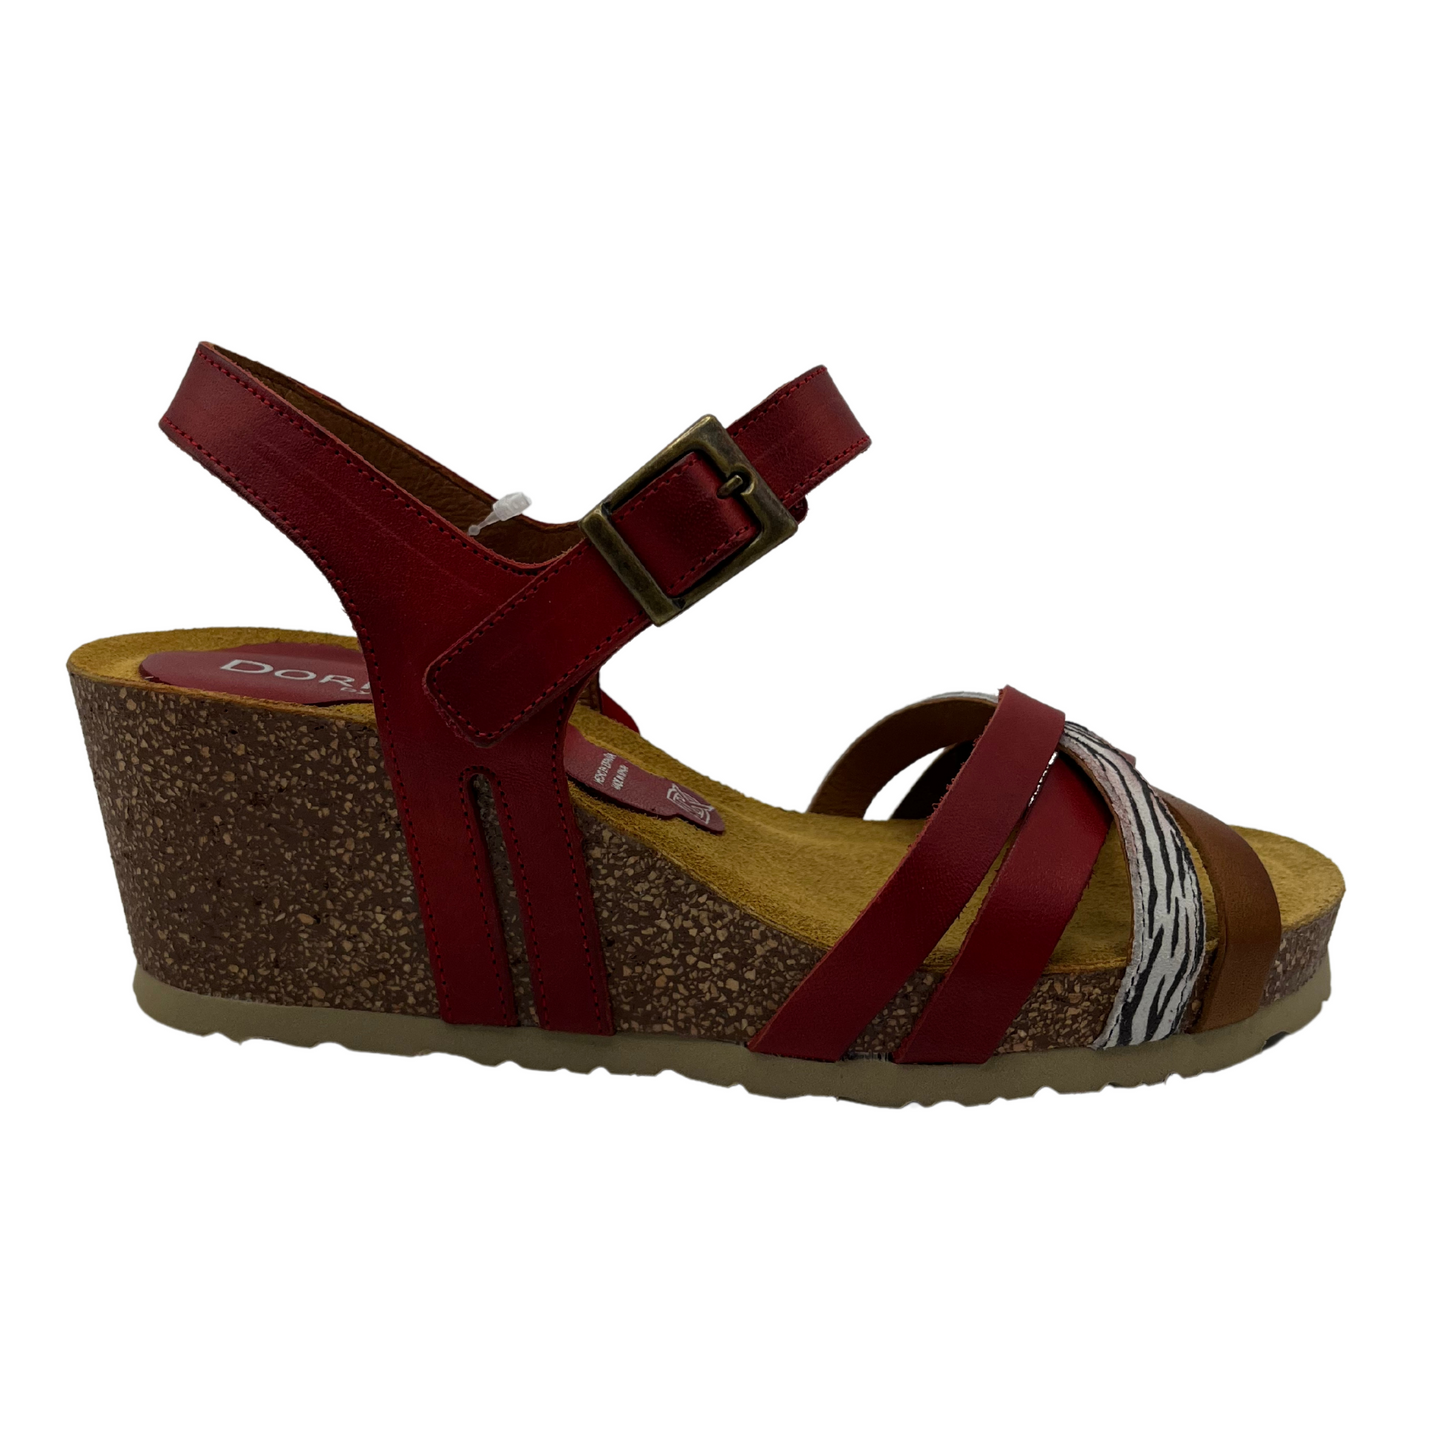 Right facing view of brown and metallic leather strapped sandal with rubber outsole